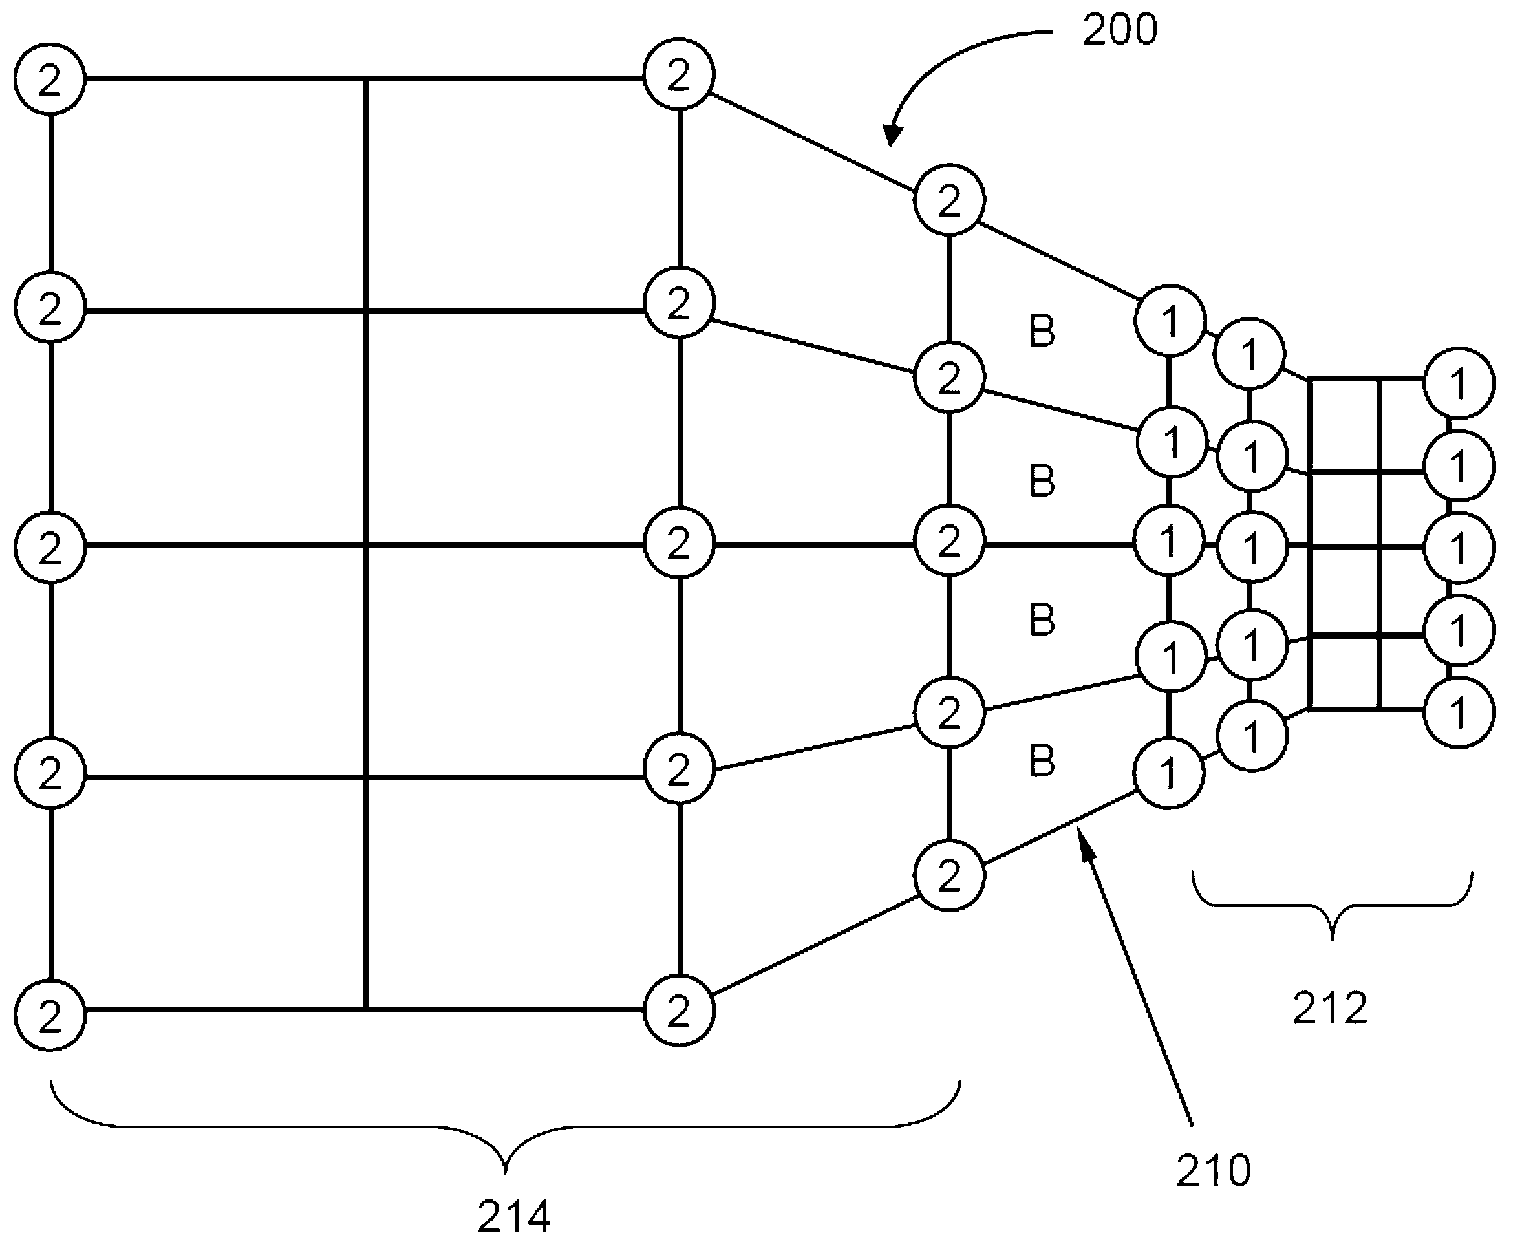 Numerically simulating structural behaviors of a product by using explicit finite element analysis with a combined technique of mass scaling and subcycling